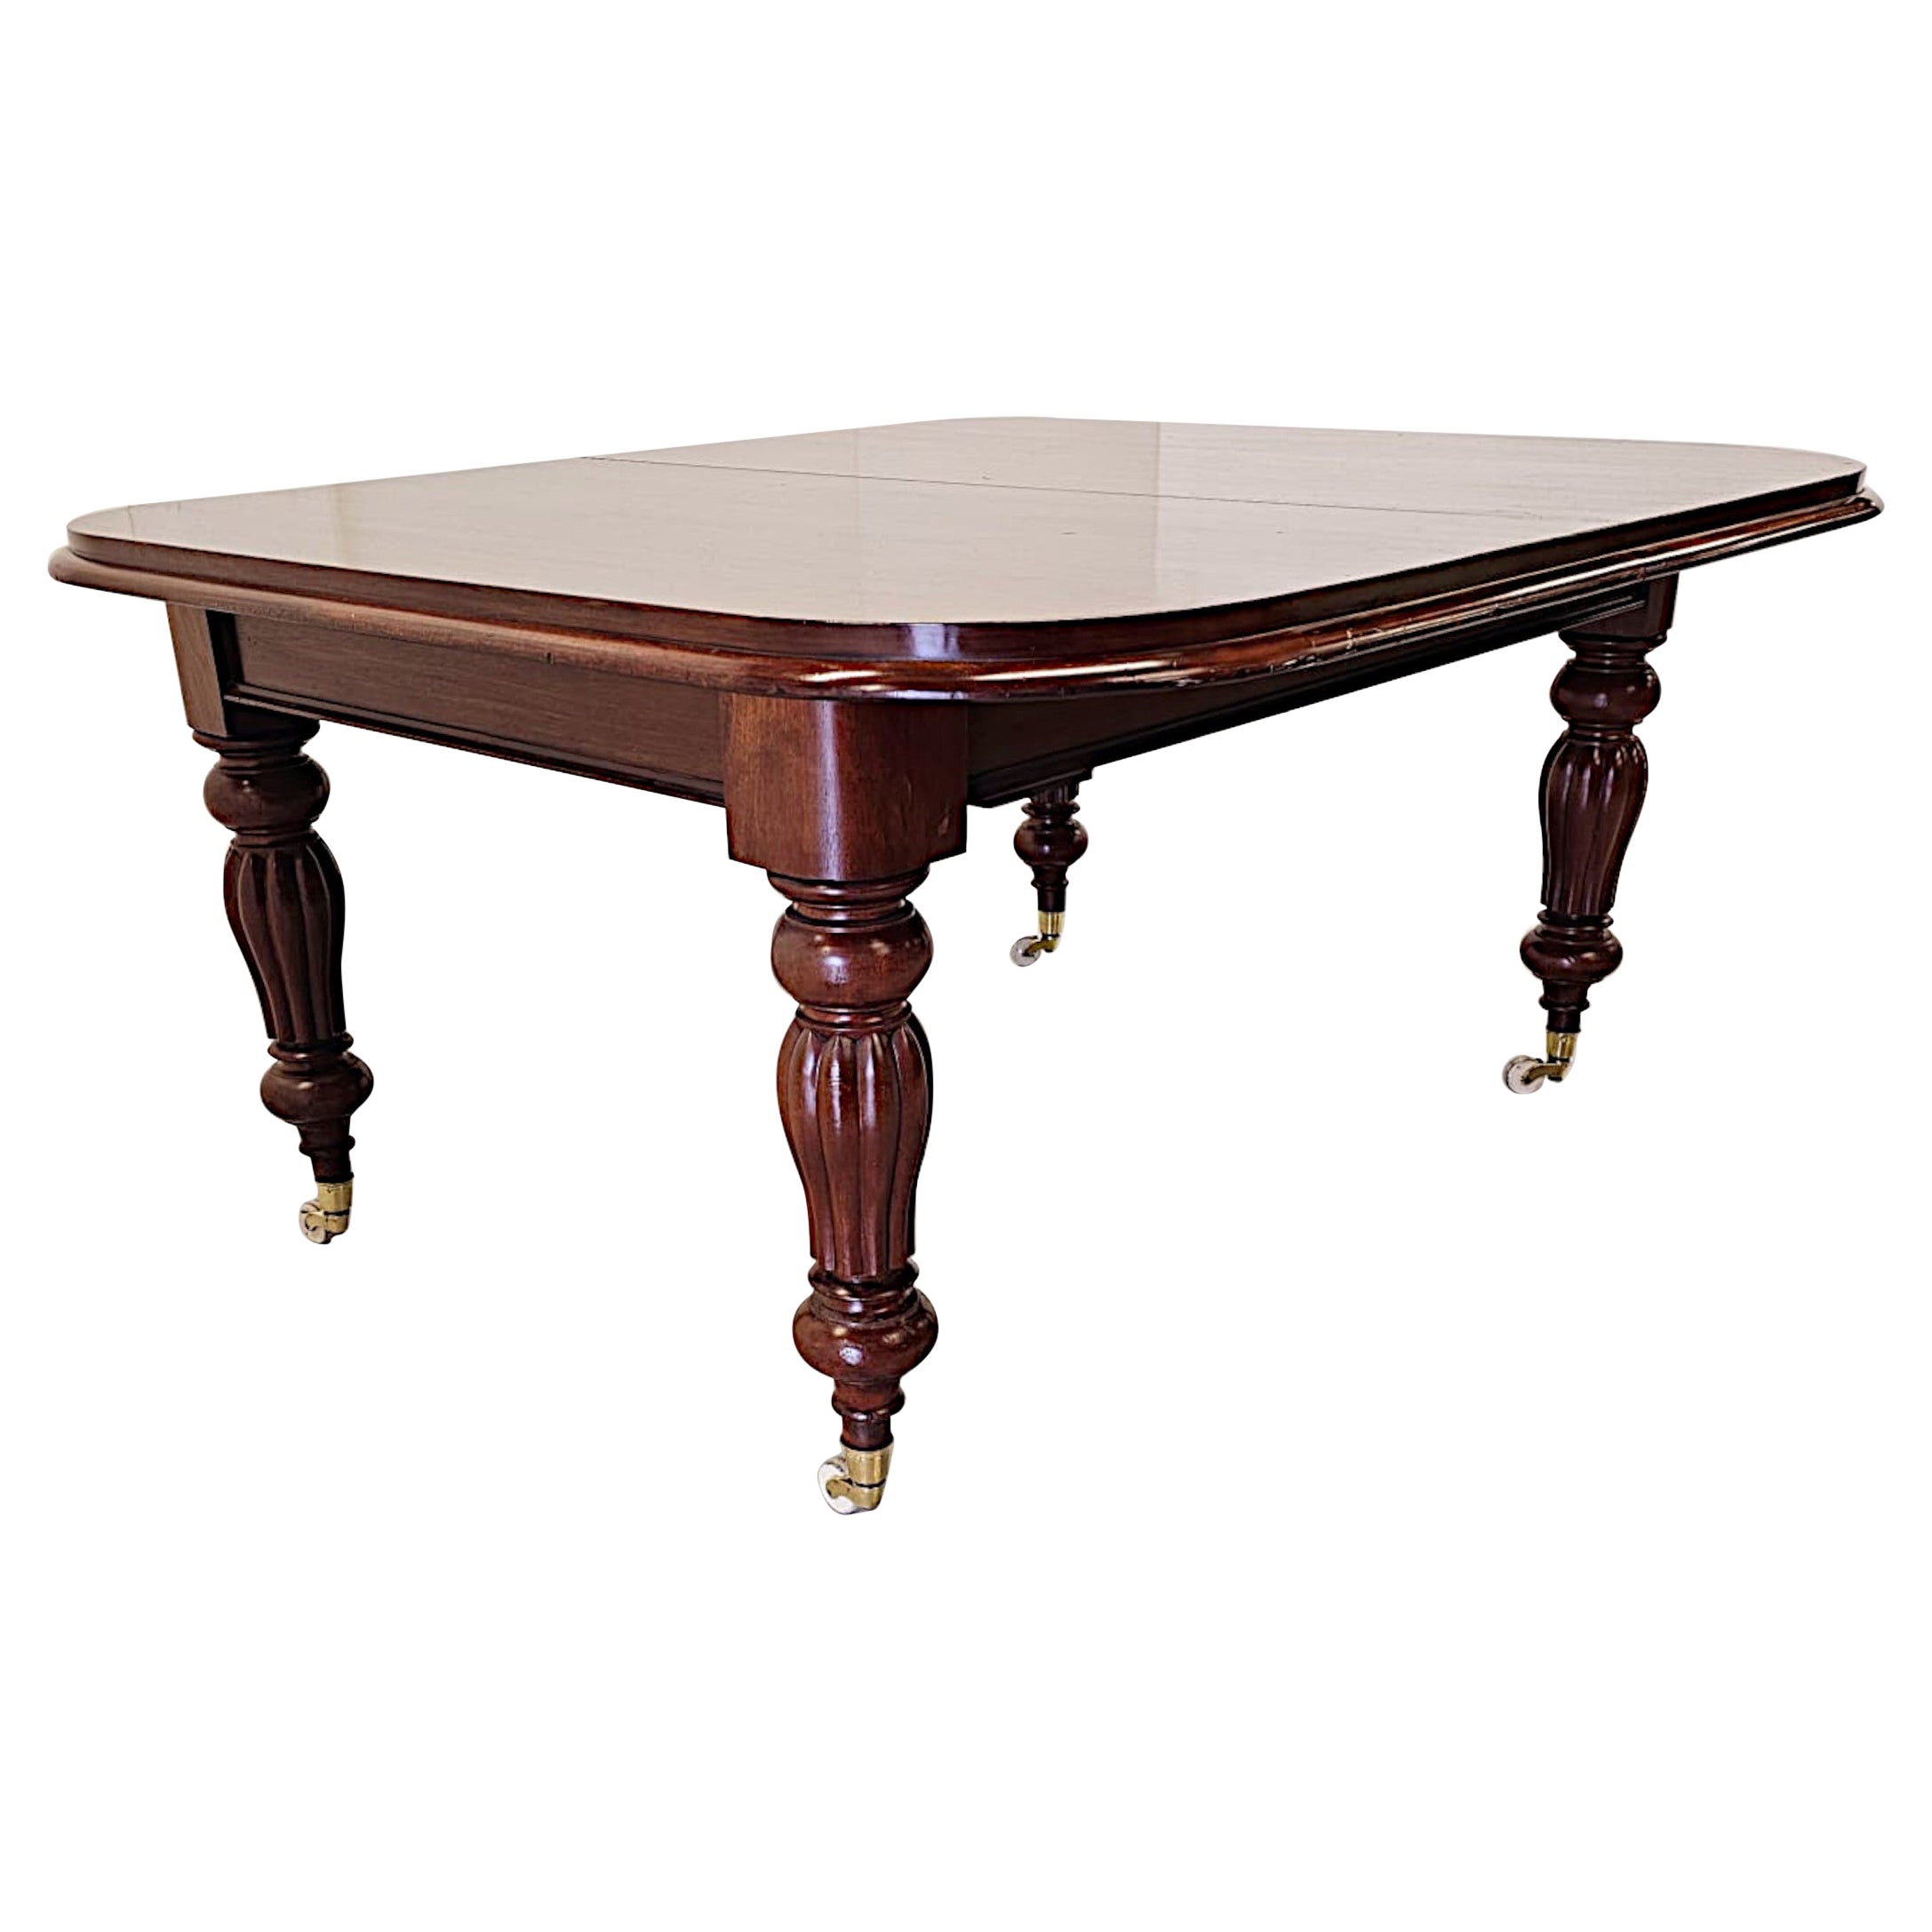  A Fine 19th Century Dining Table  For Sale